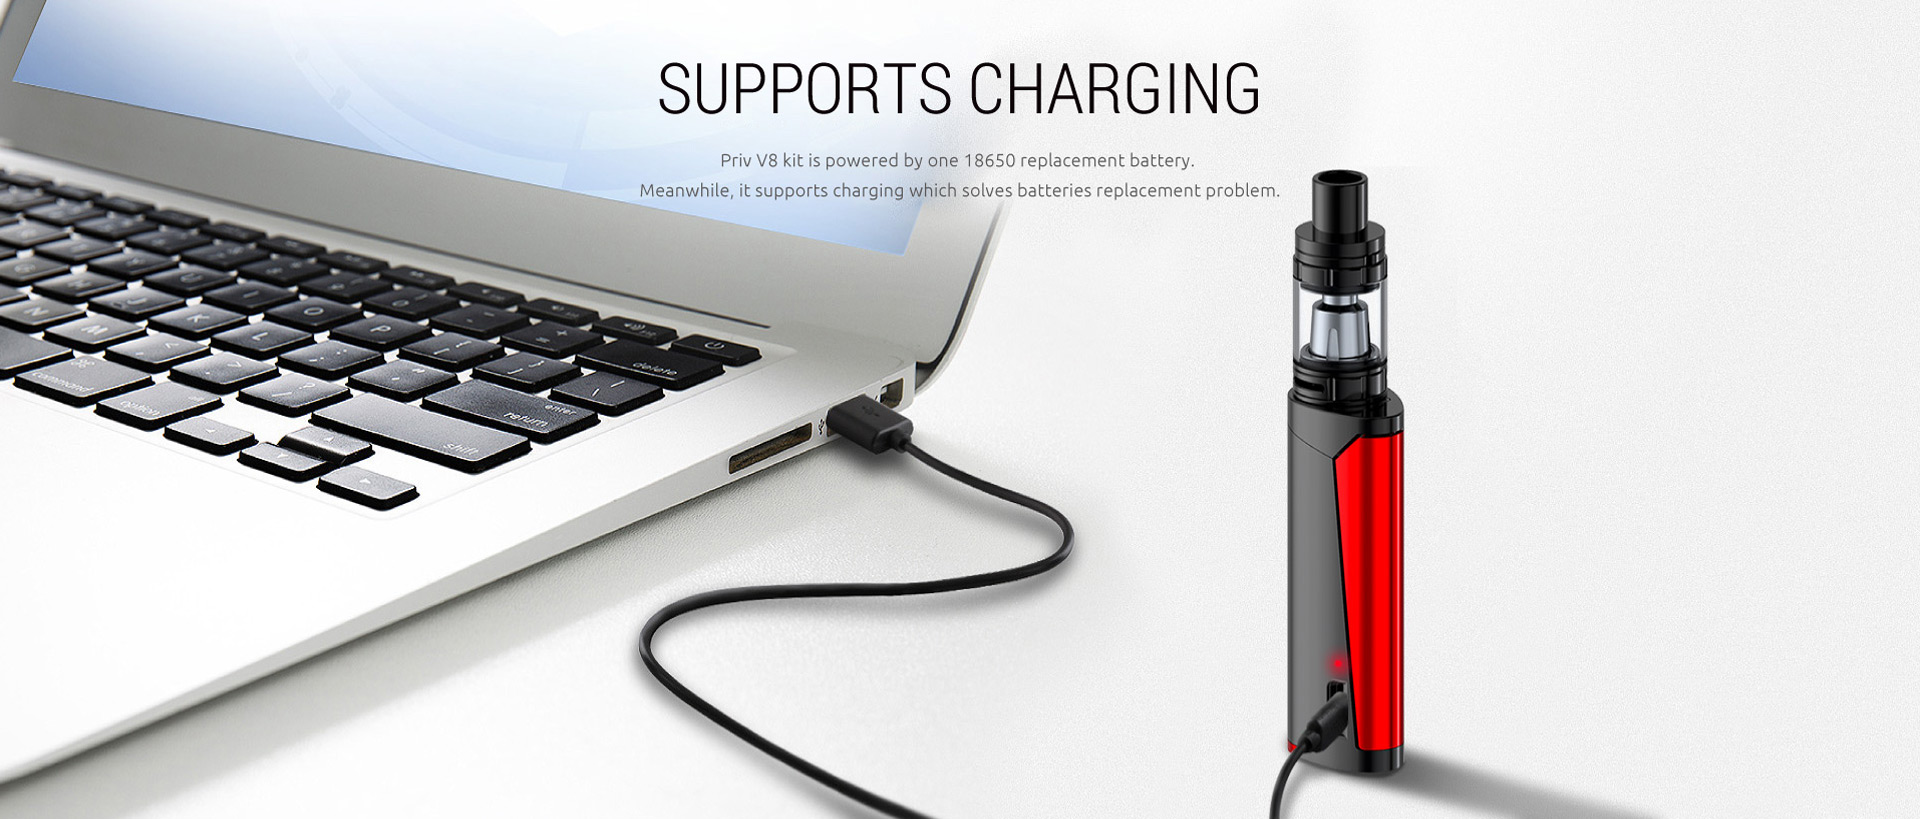 Suports Charging Feature for SMOK Priv V8 Kit